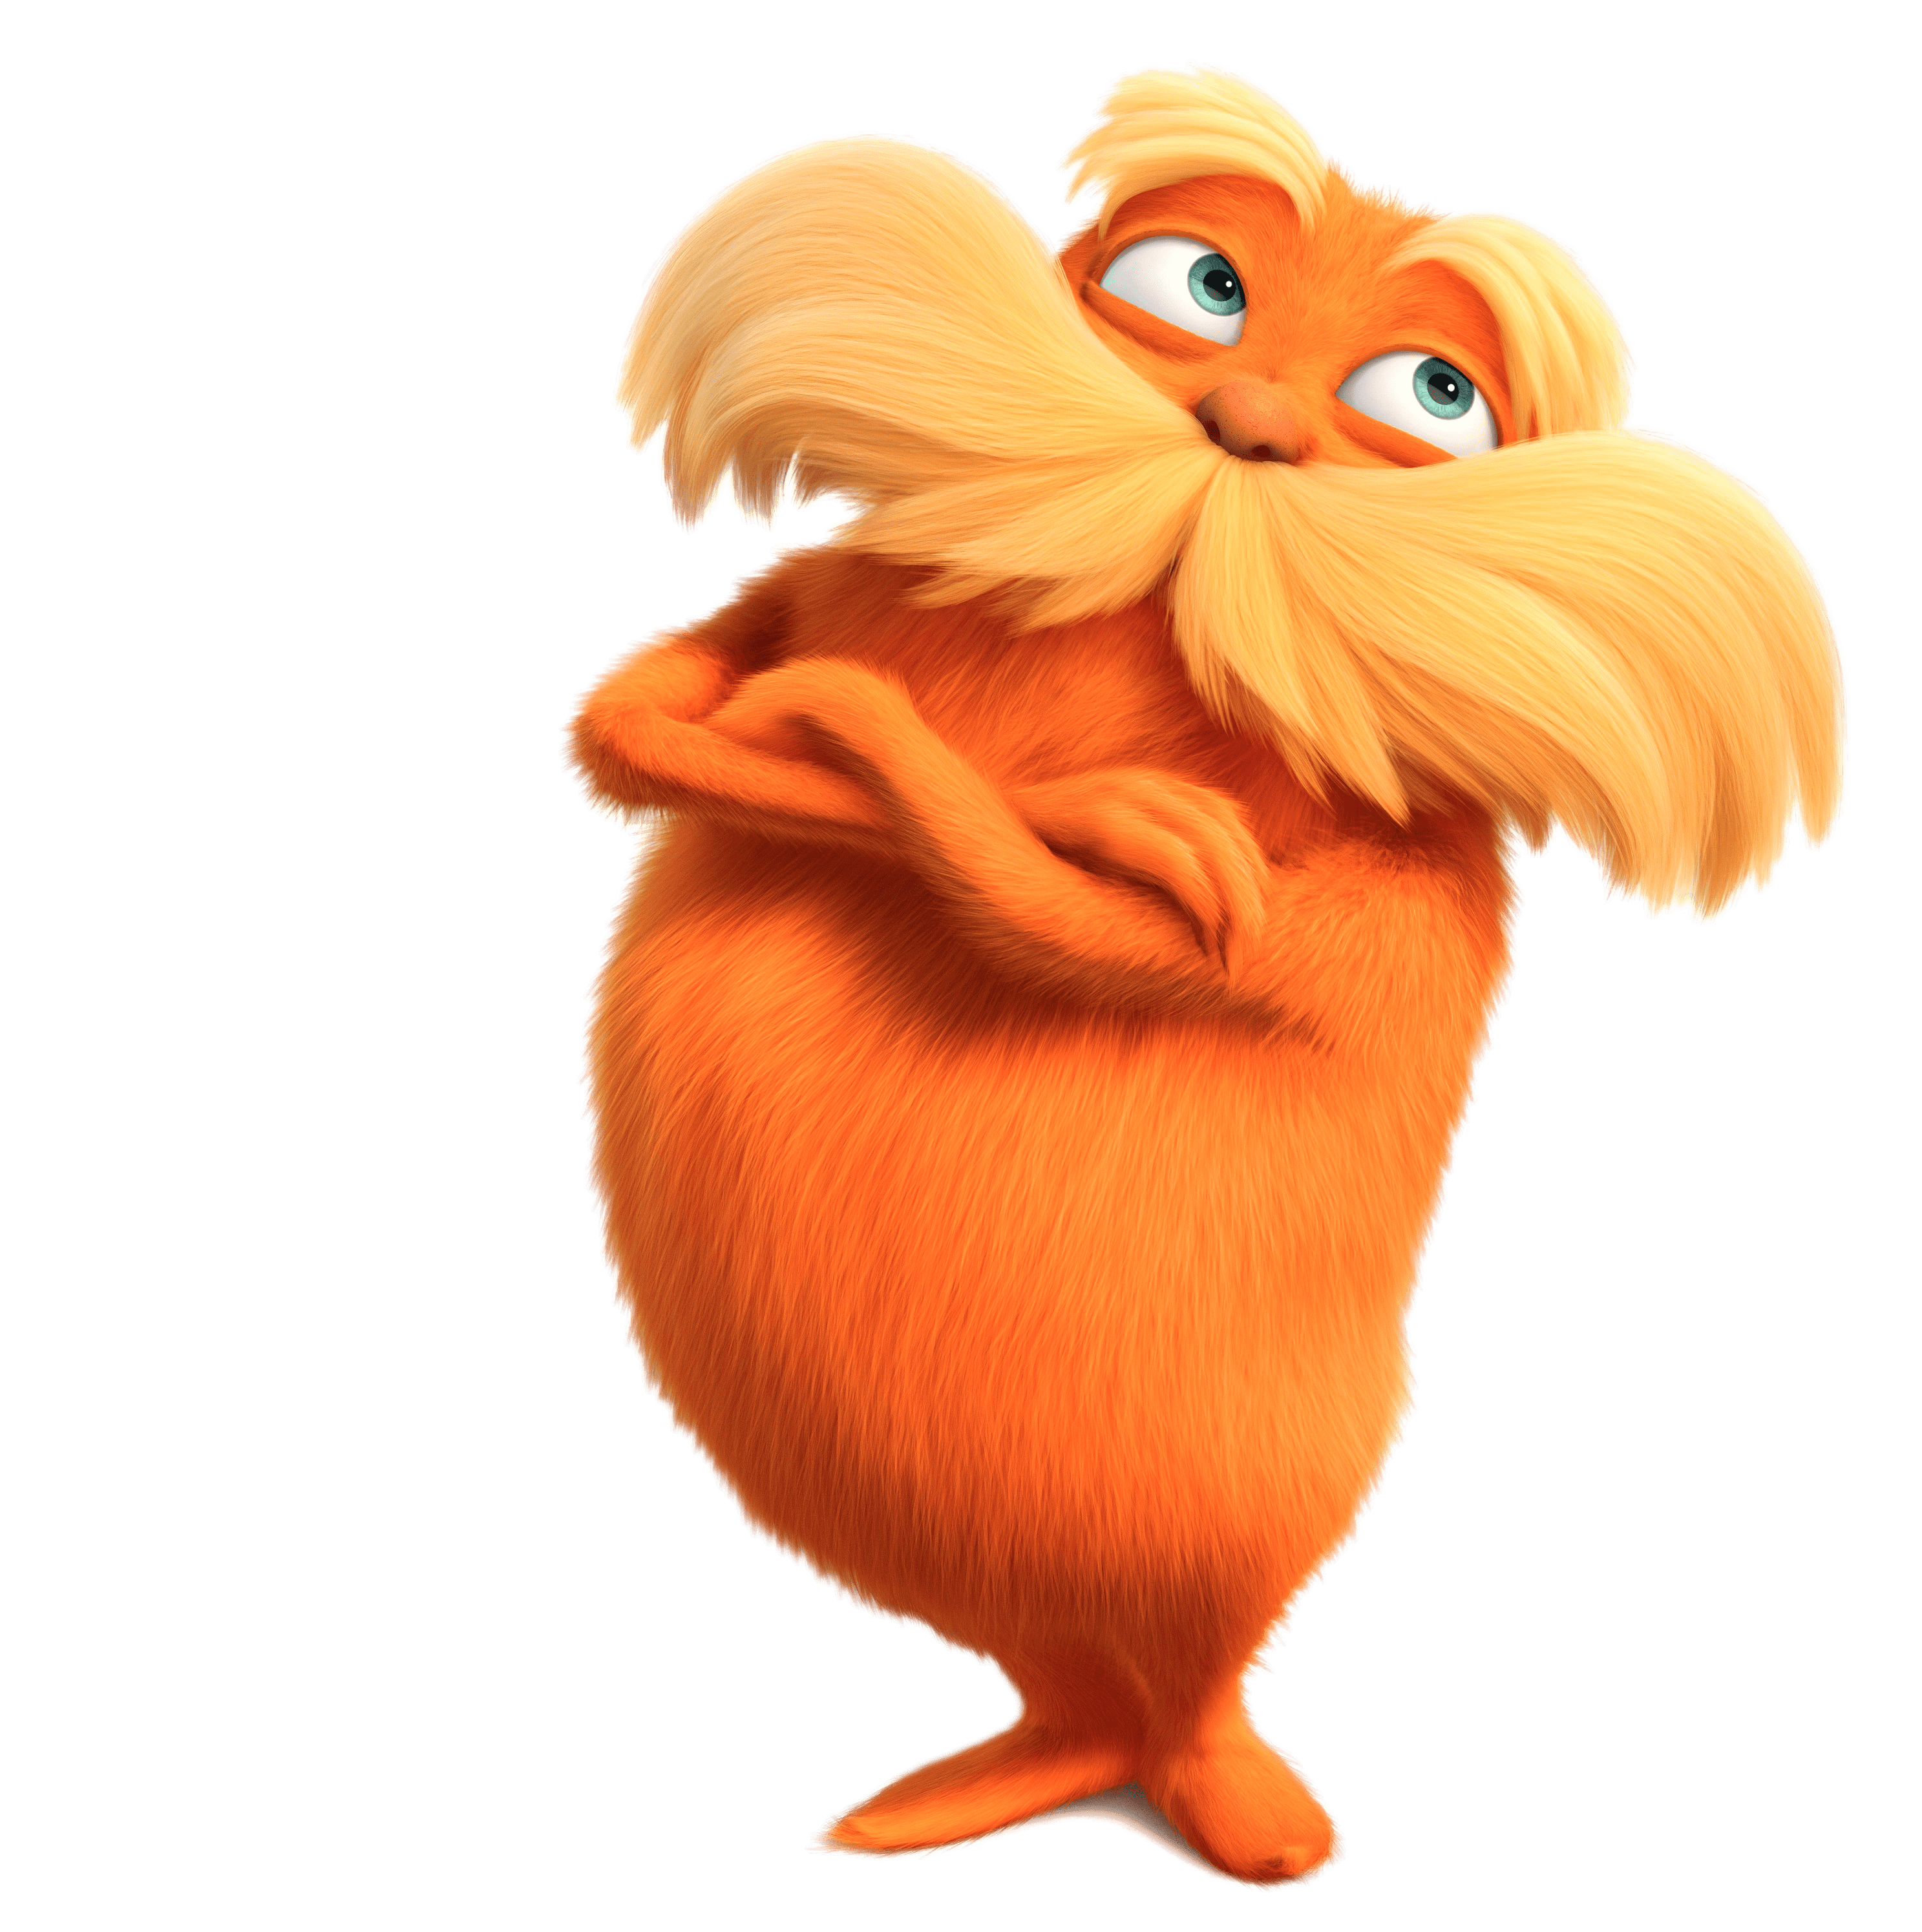 Reel Lessons: The Lorax